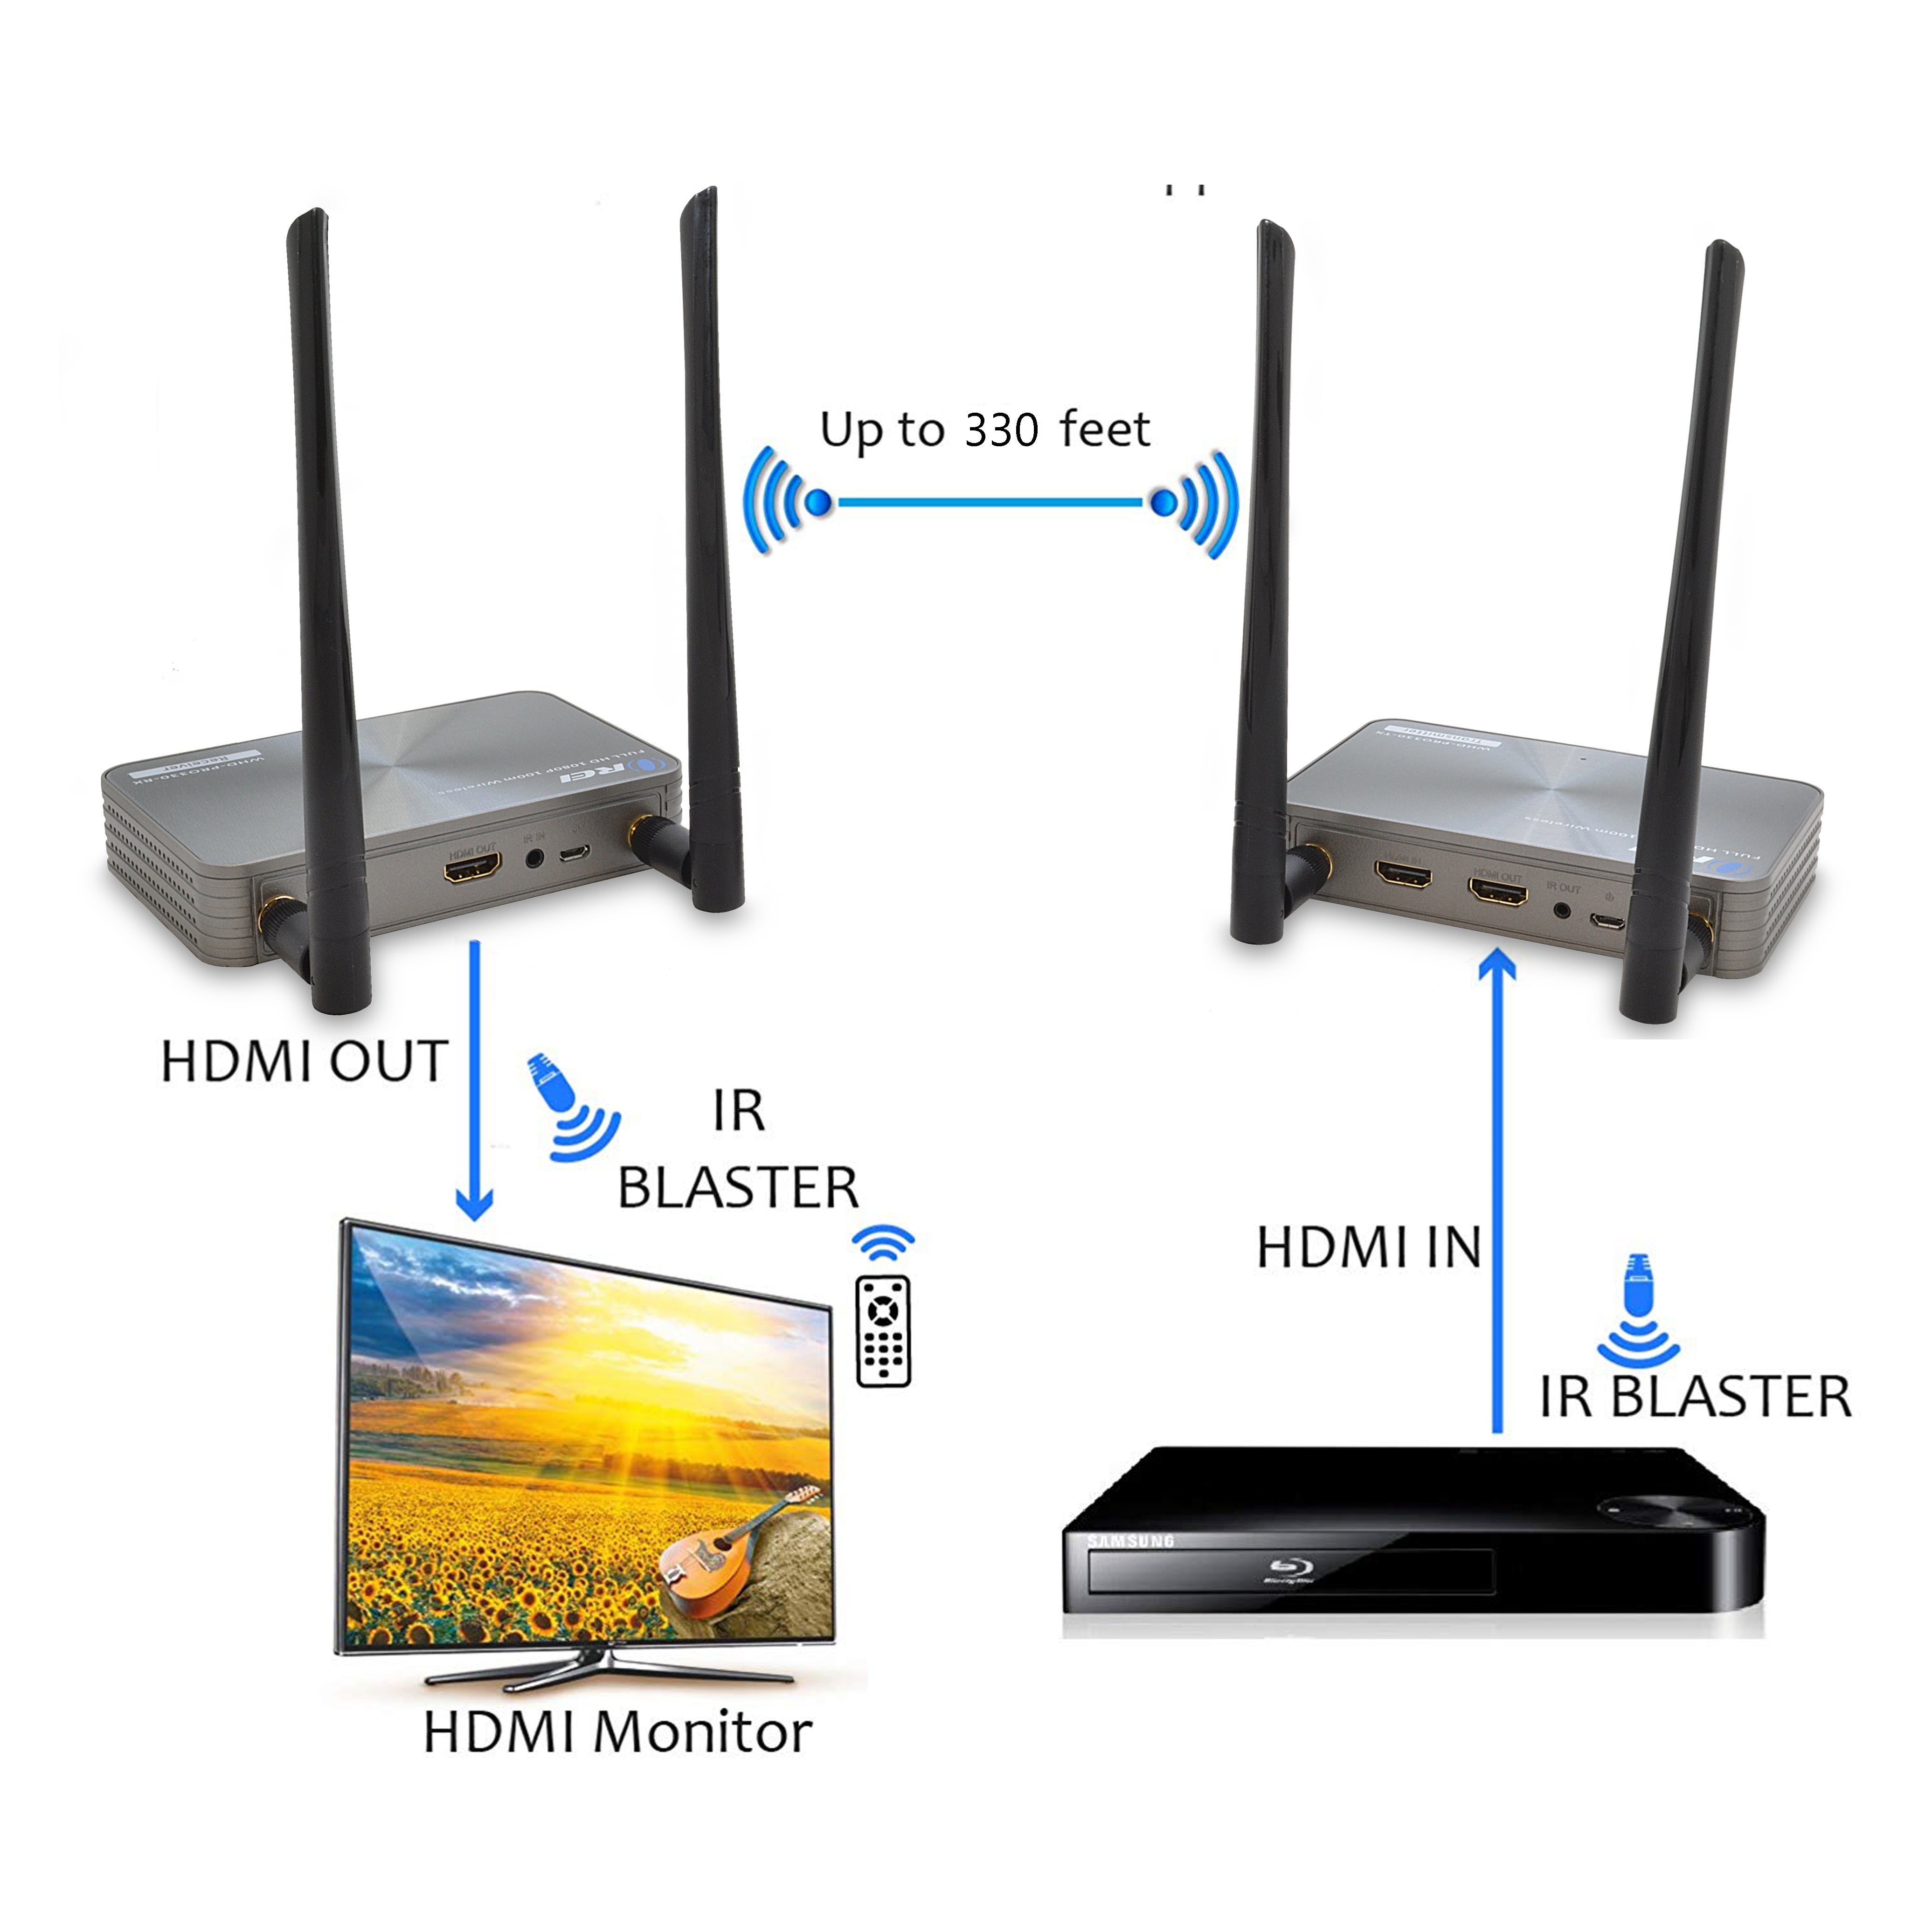 Wireless HDMI Transmitter/Receiver Kit - Conference Room